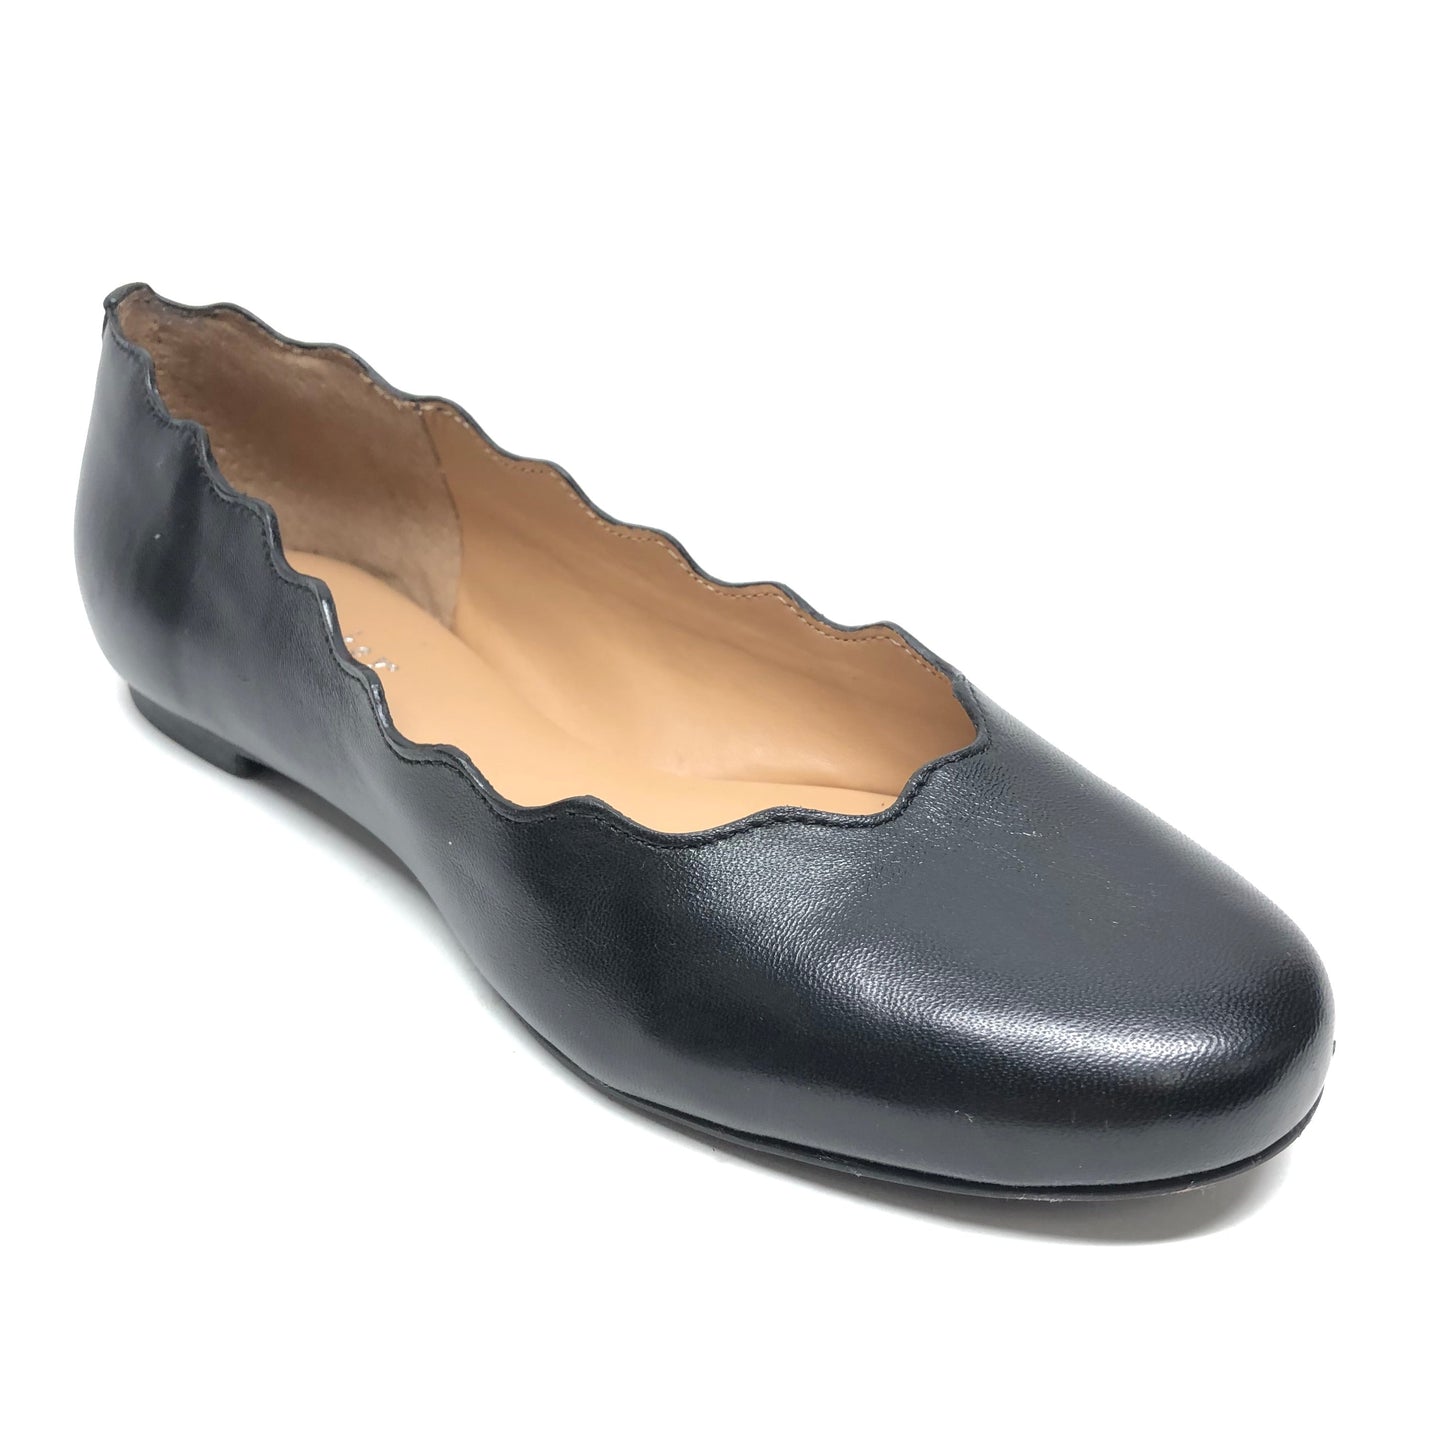 Shoes Flats By Copper Key  Size: 6.5